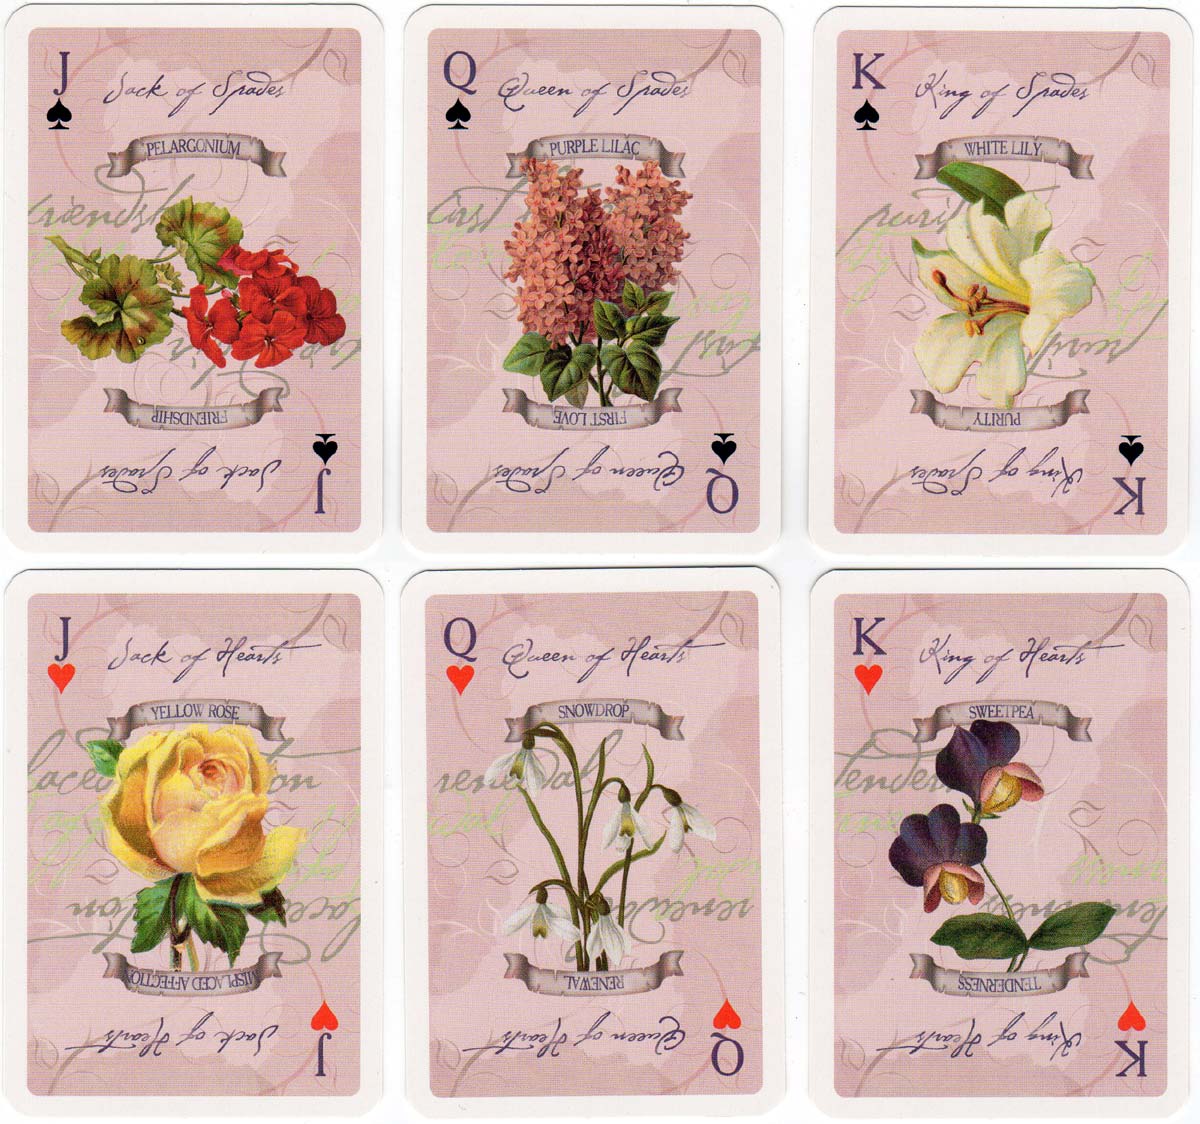 Language of Flowers by Past Times, c.1999